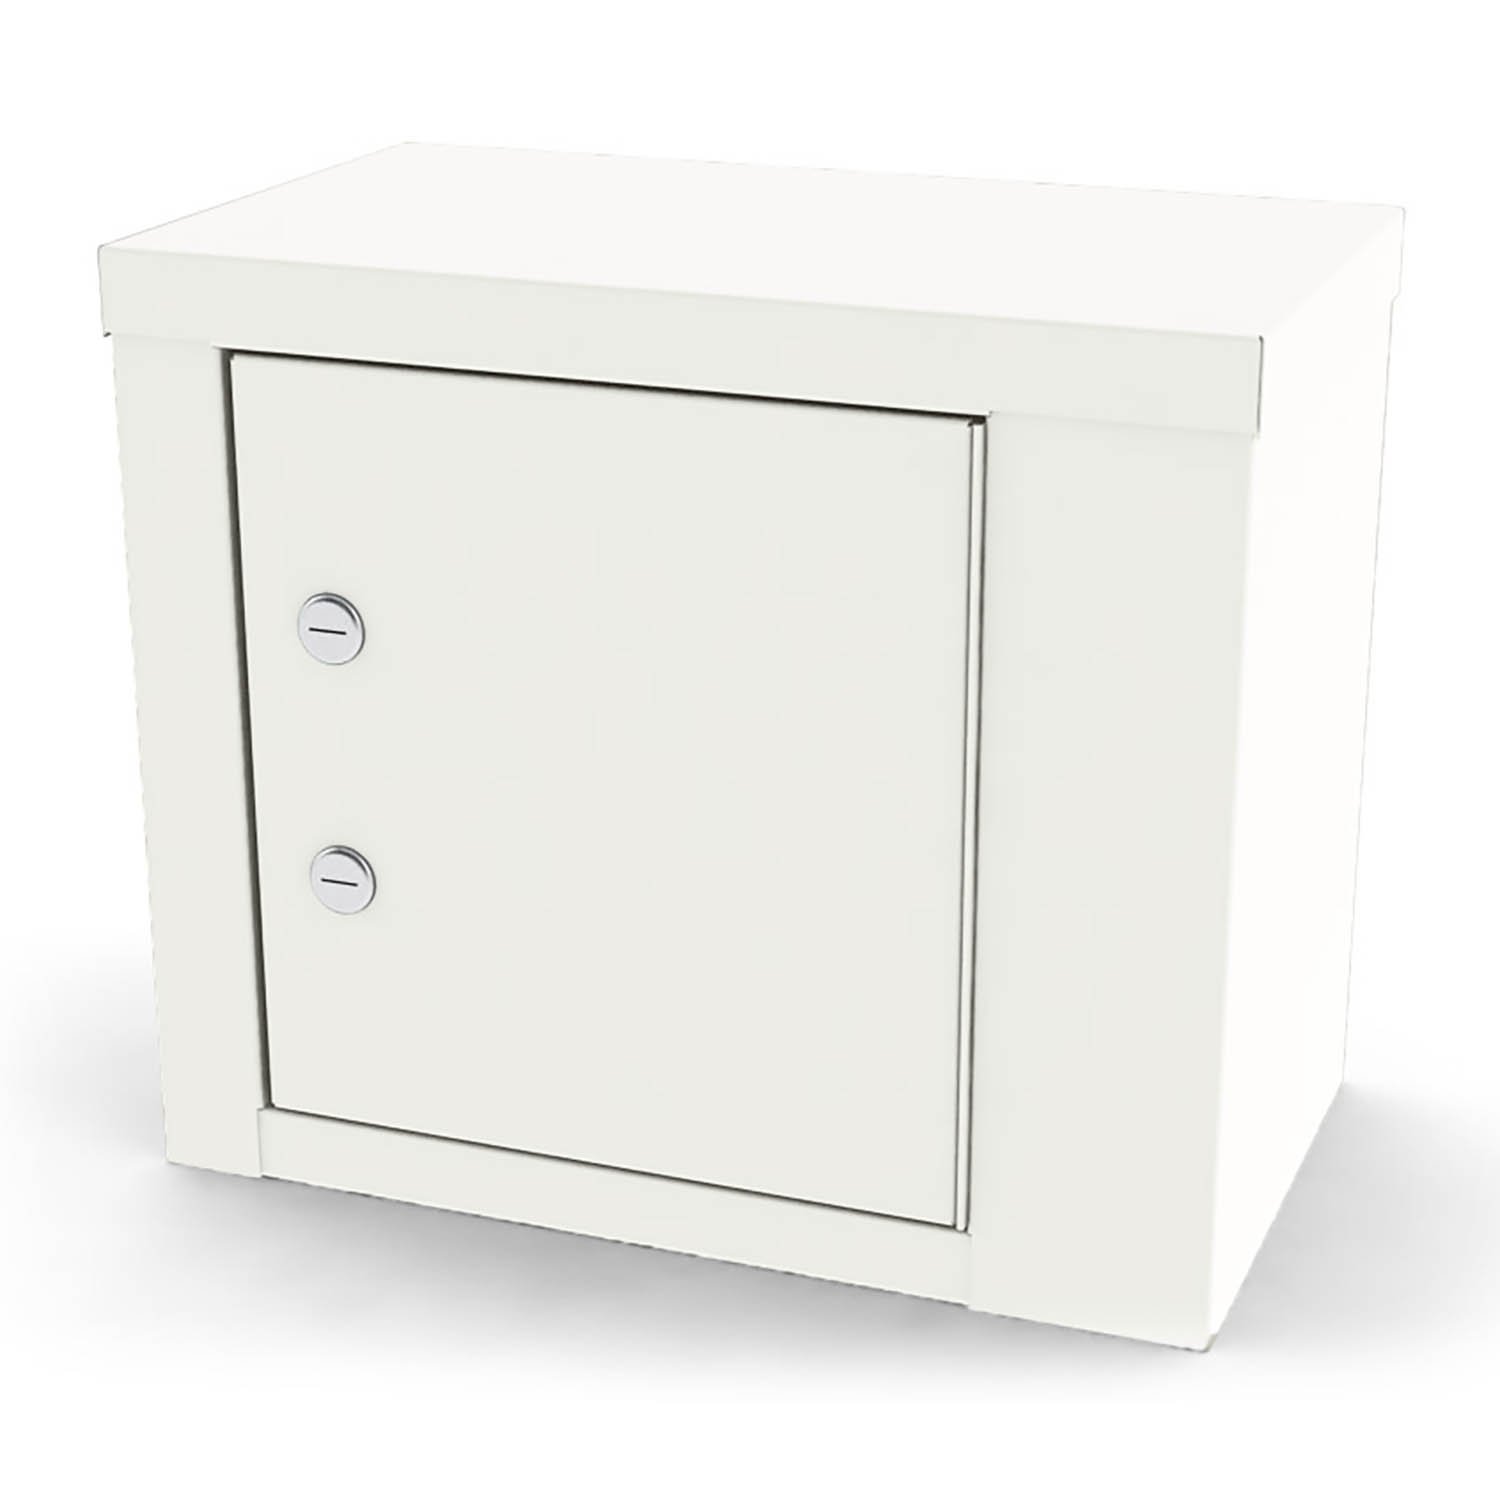 https://www.universalmedicalinc.com/media/catalog/product/cache/396fa530d5fa12bef36f4c19de24af0a/7/7/7787_painted-steel-narcotic-cabinet-single-door-double-locks-one-shelf-quiet-white.jpg